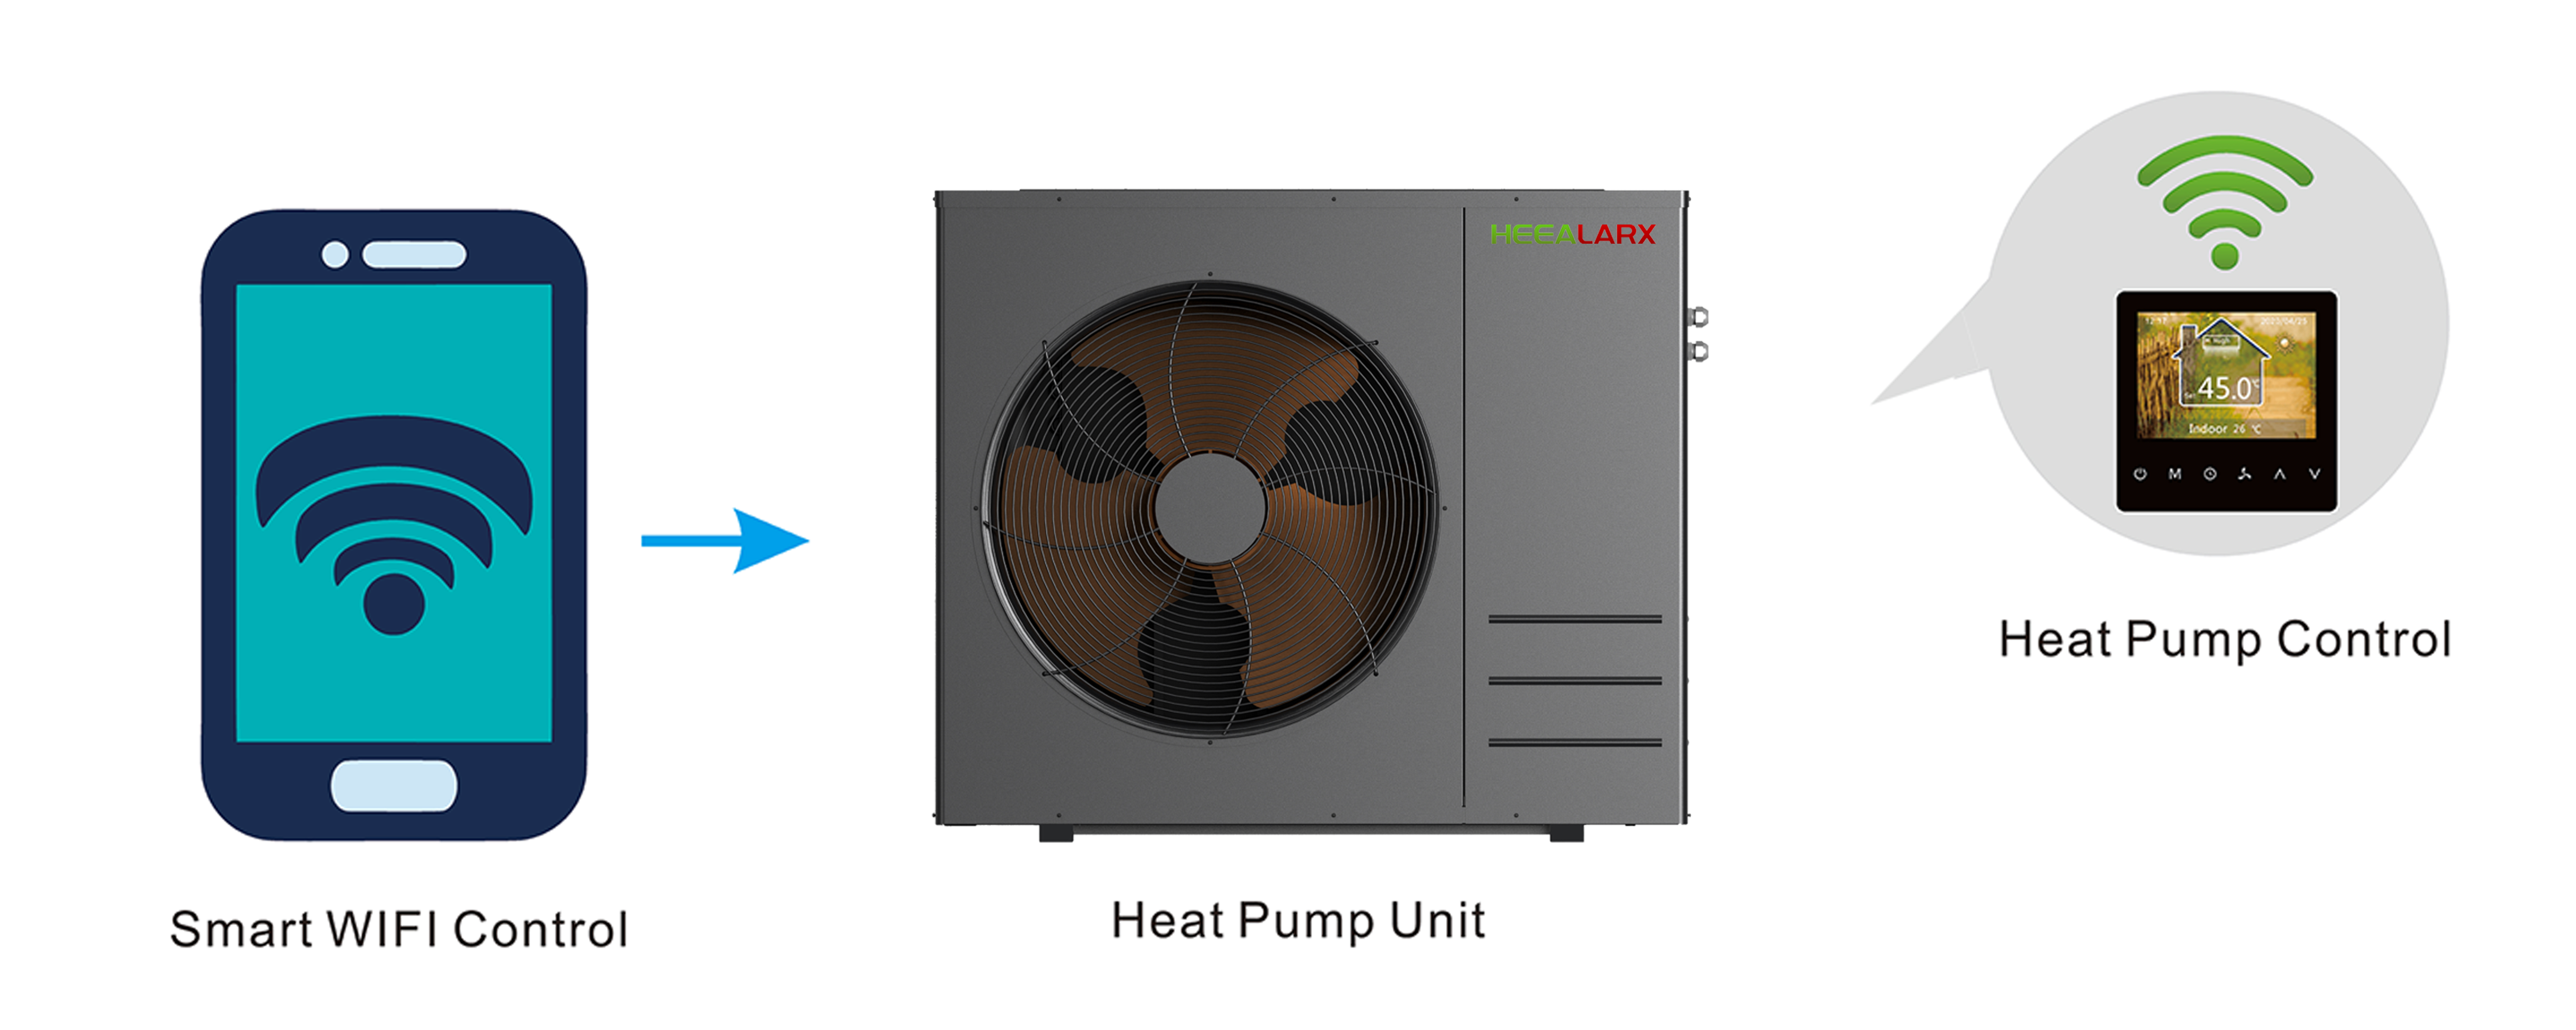 Eco Friendly Monobloc Inverter Air Source Heat Pump Water Heater For Domestic Hot Water Supply Details